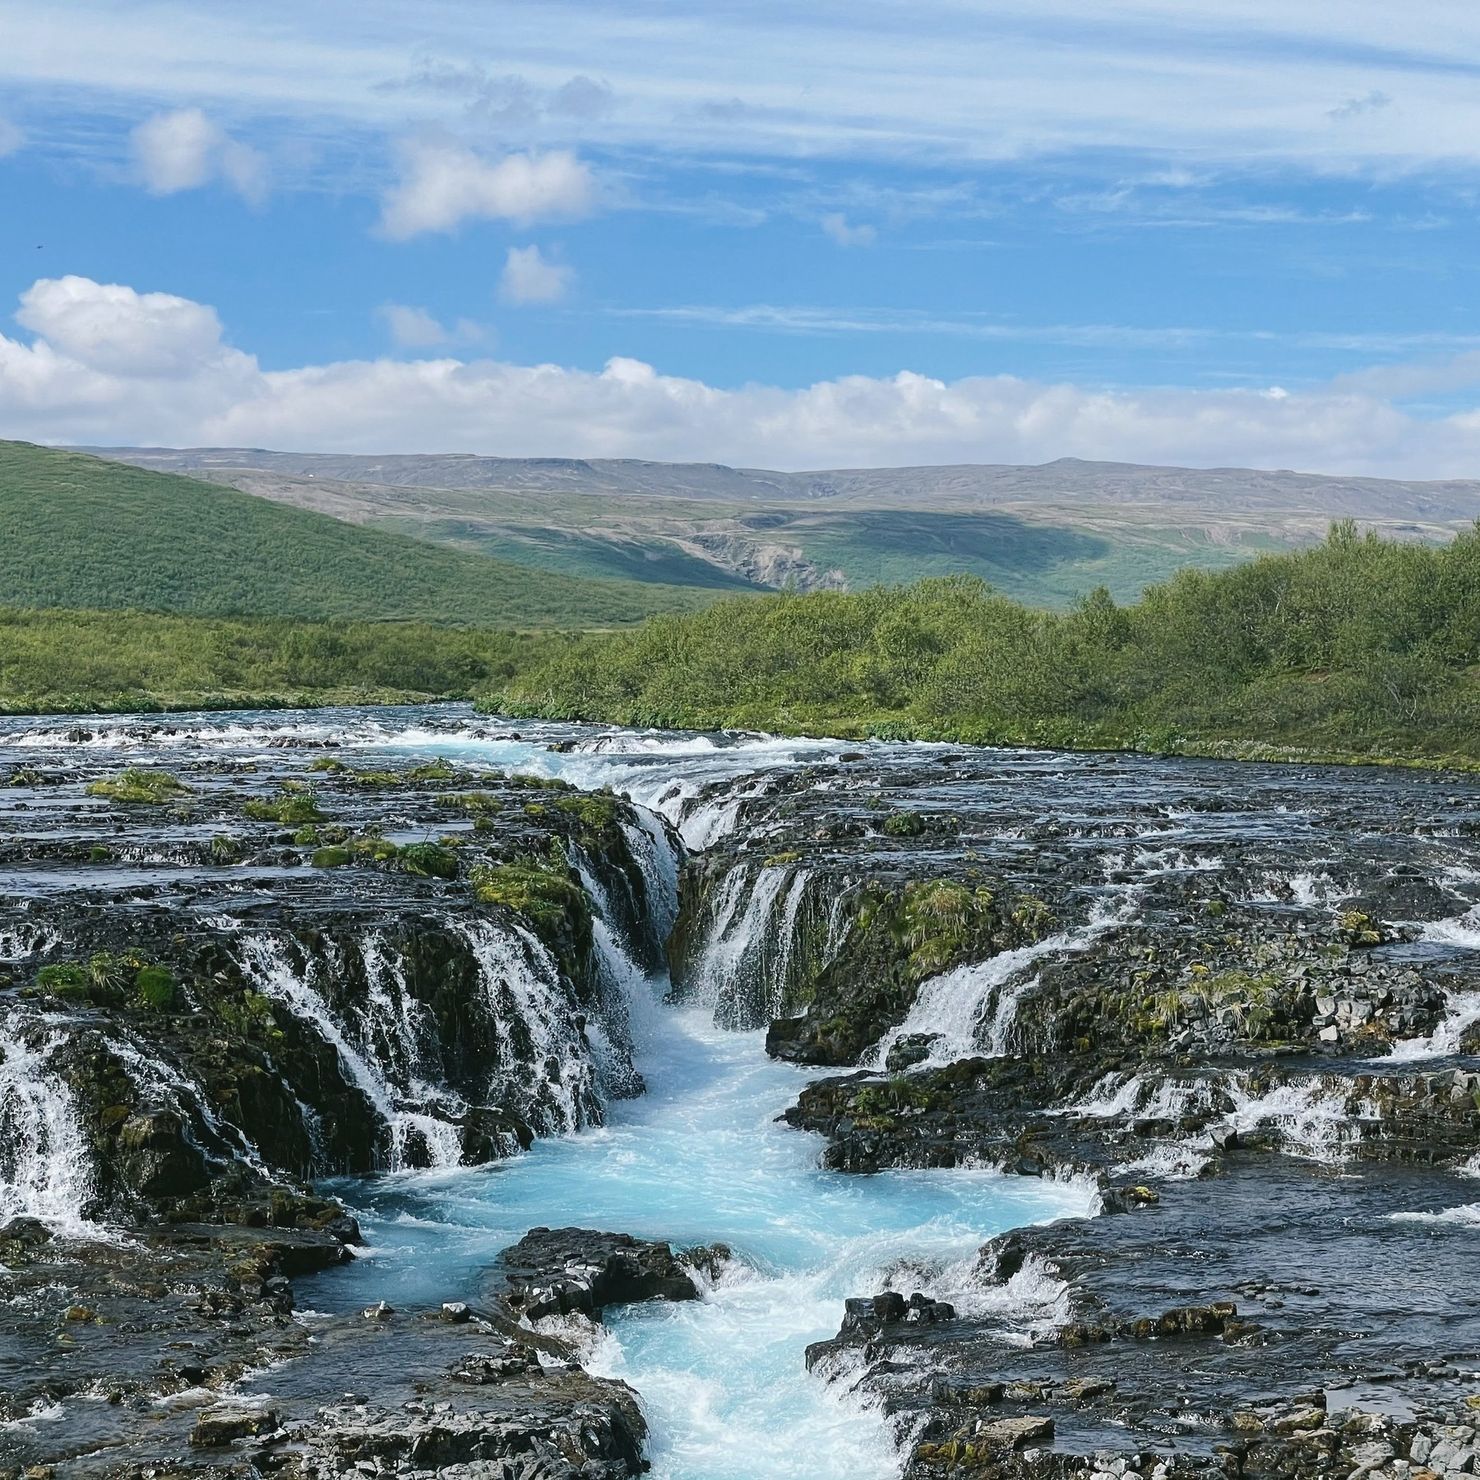 It only takes 20 minutes to walk to the lovely waterfall Brúarfoss